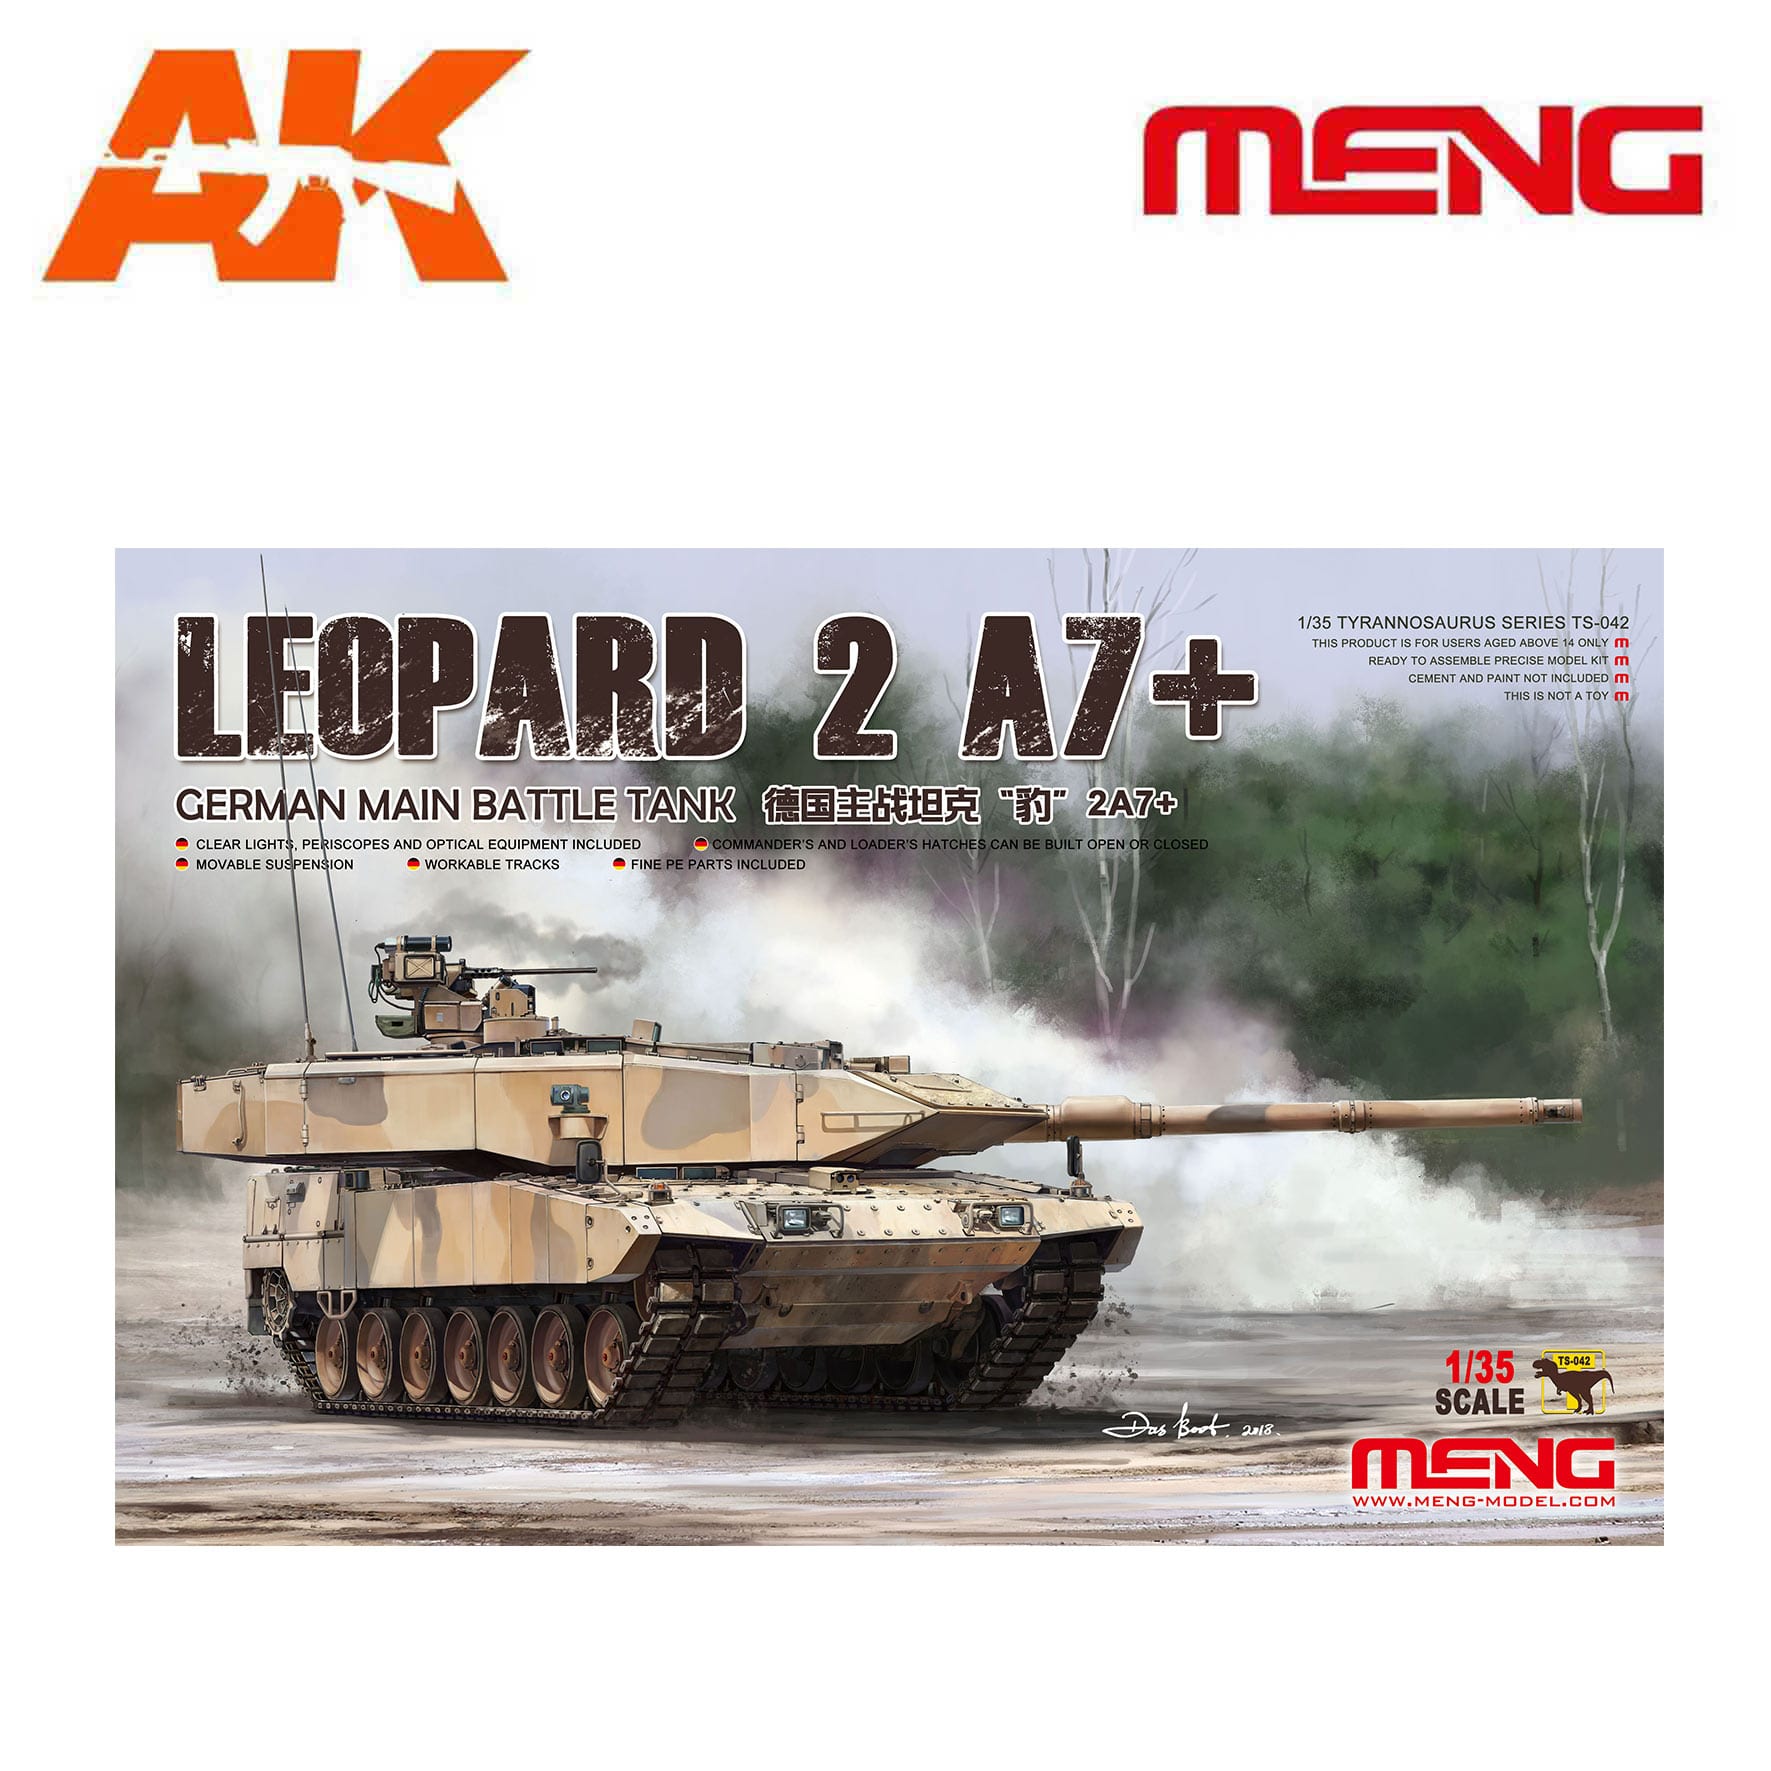 New 1/35 Scale German Army Leopard 2 A7 Main Battle Tank NATO Camouflage Model